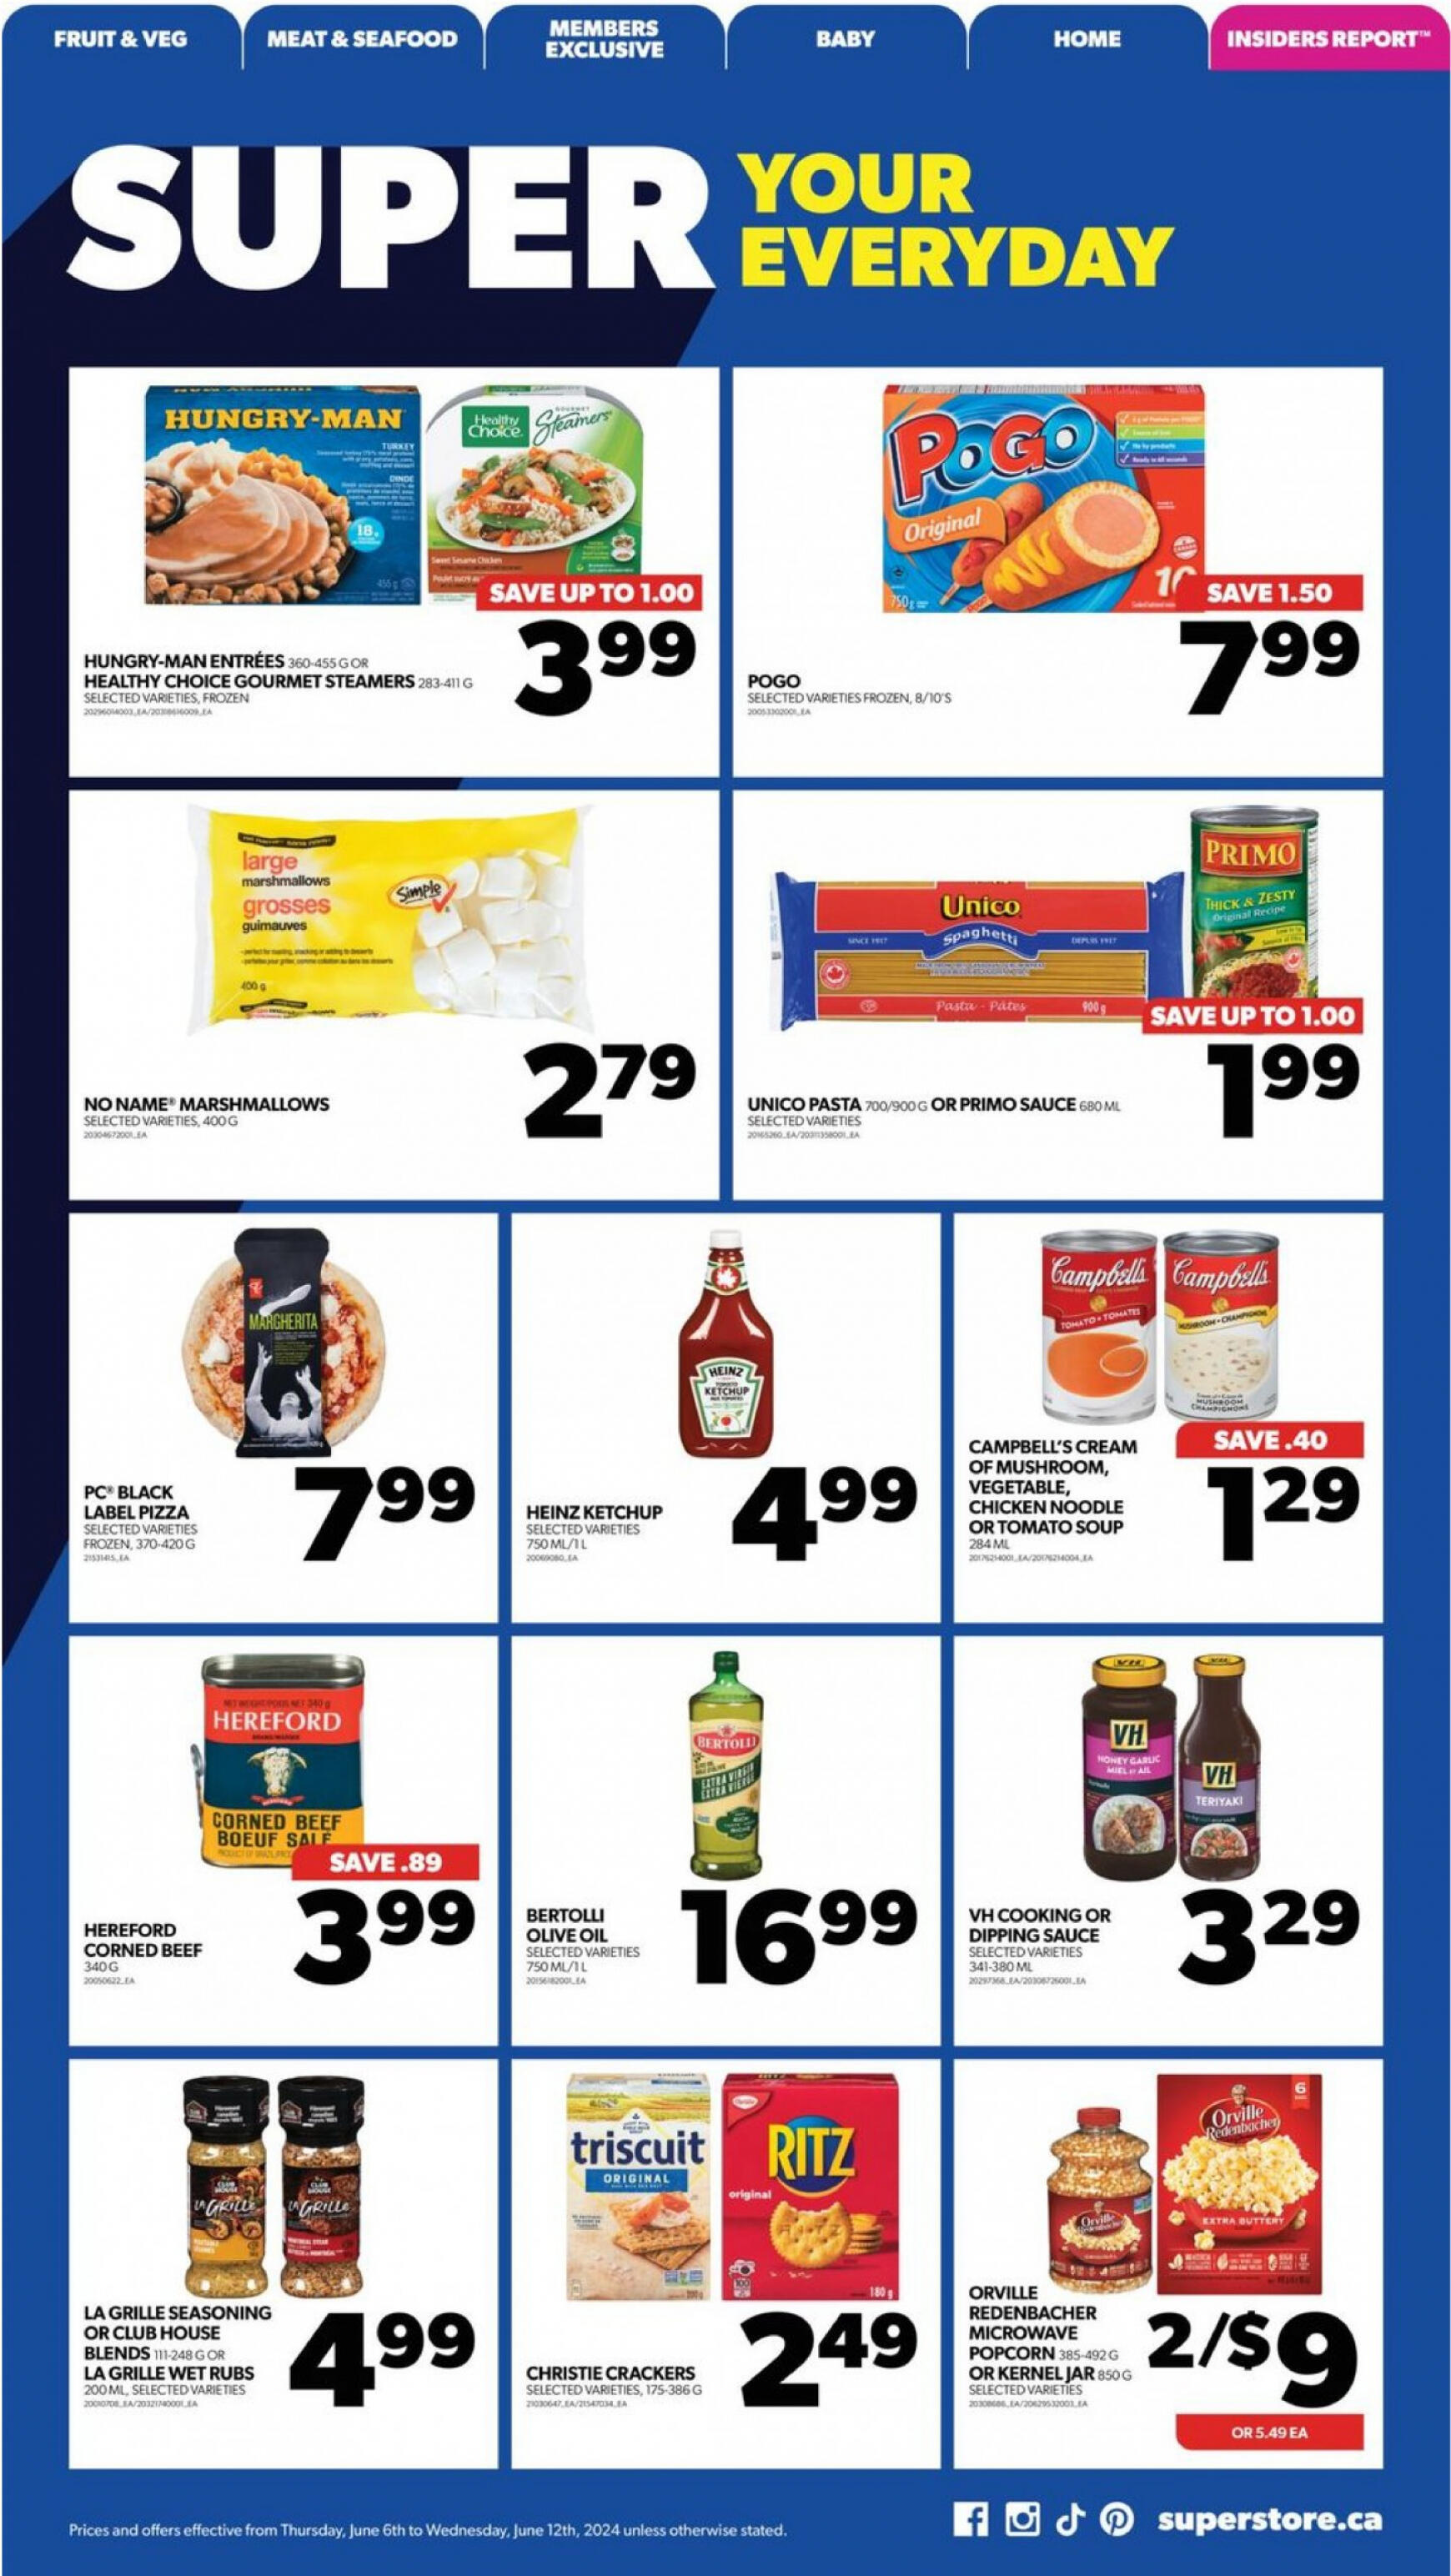 real-canadian-superstore - Real Canadian Superstore flyer current 06.06. - 12.06. - page: 16